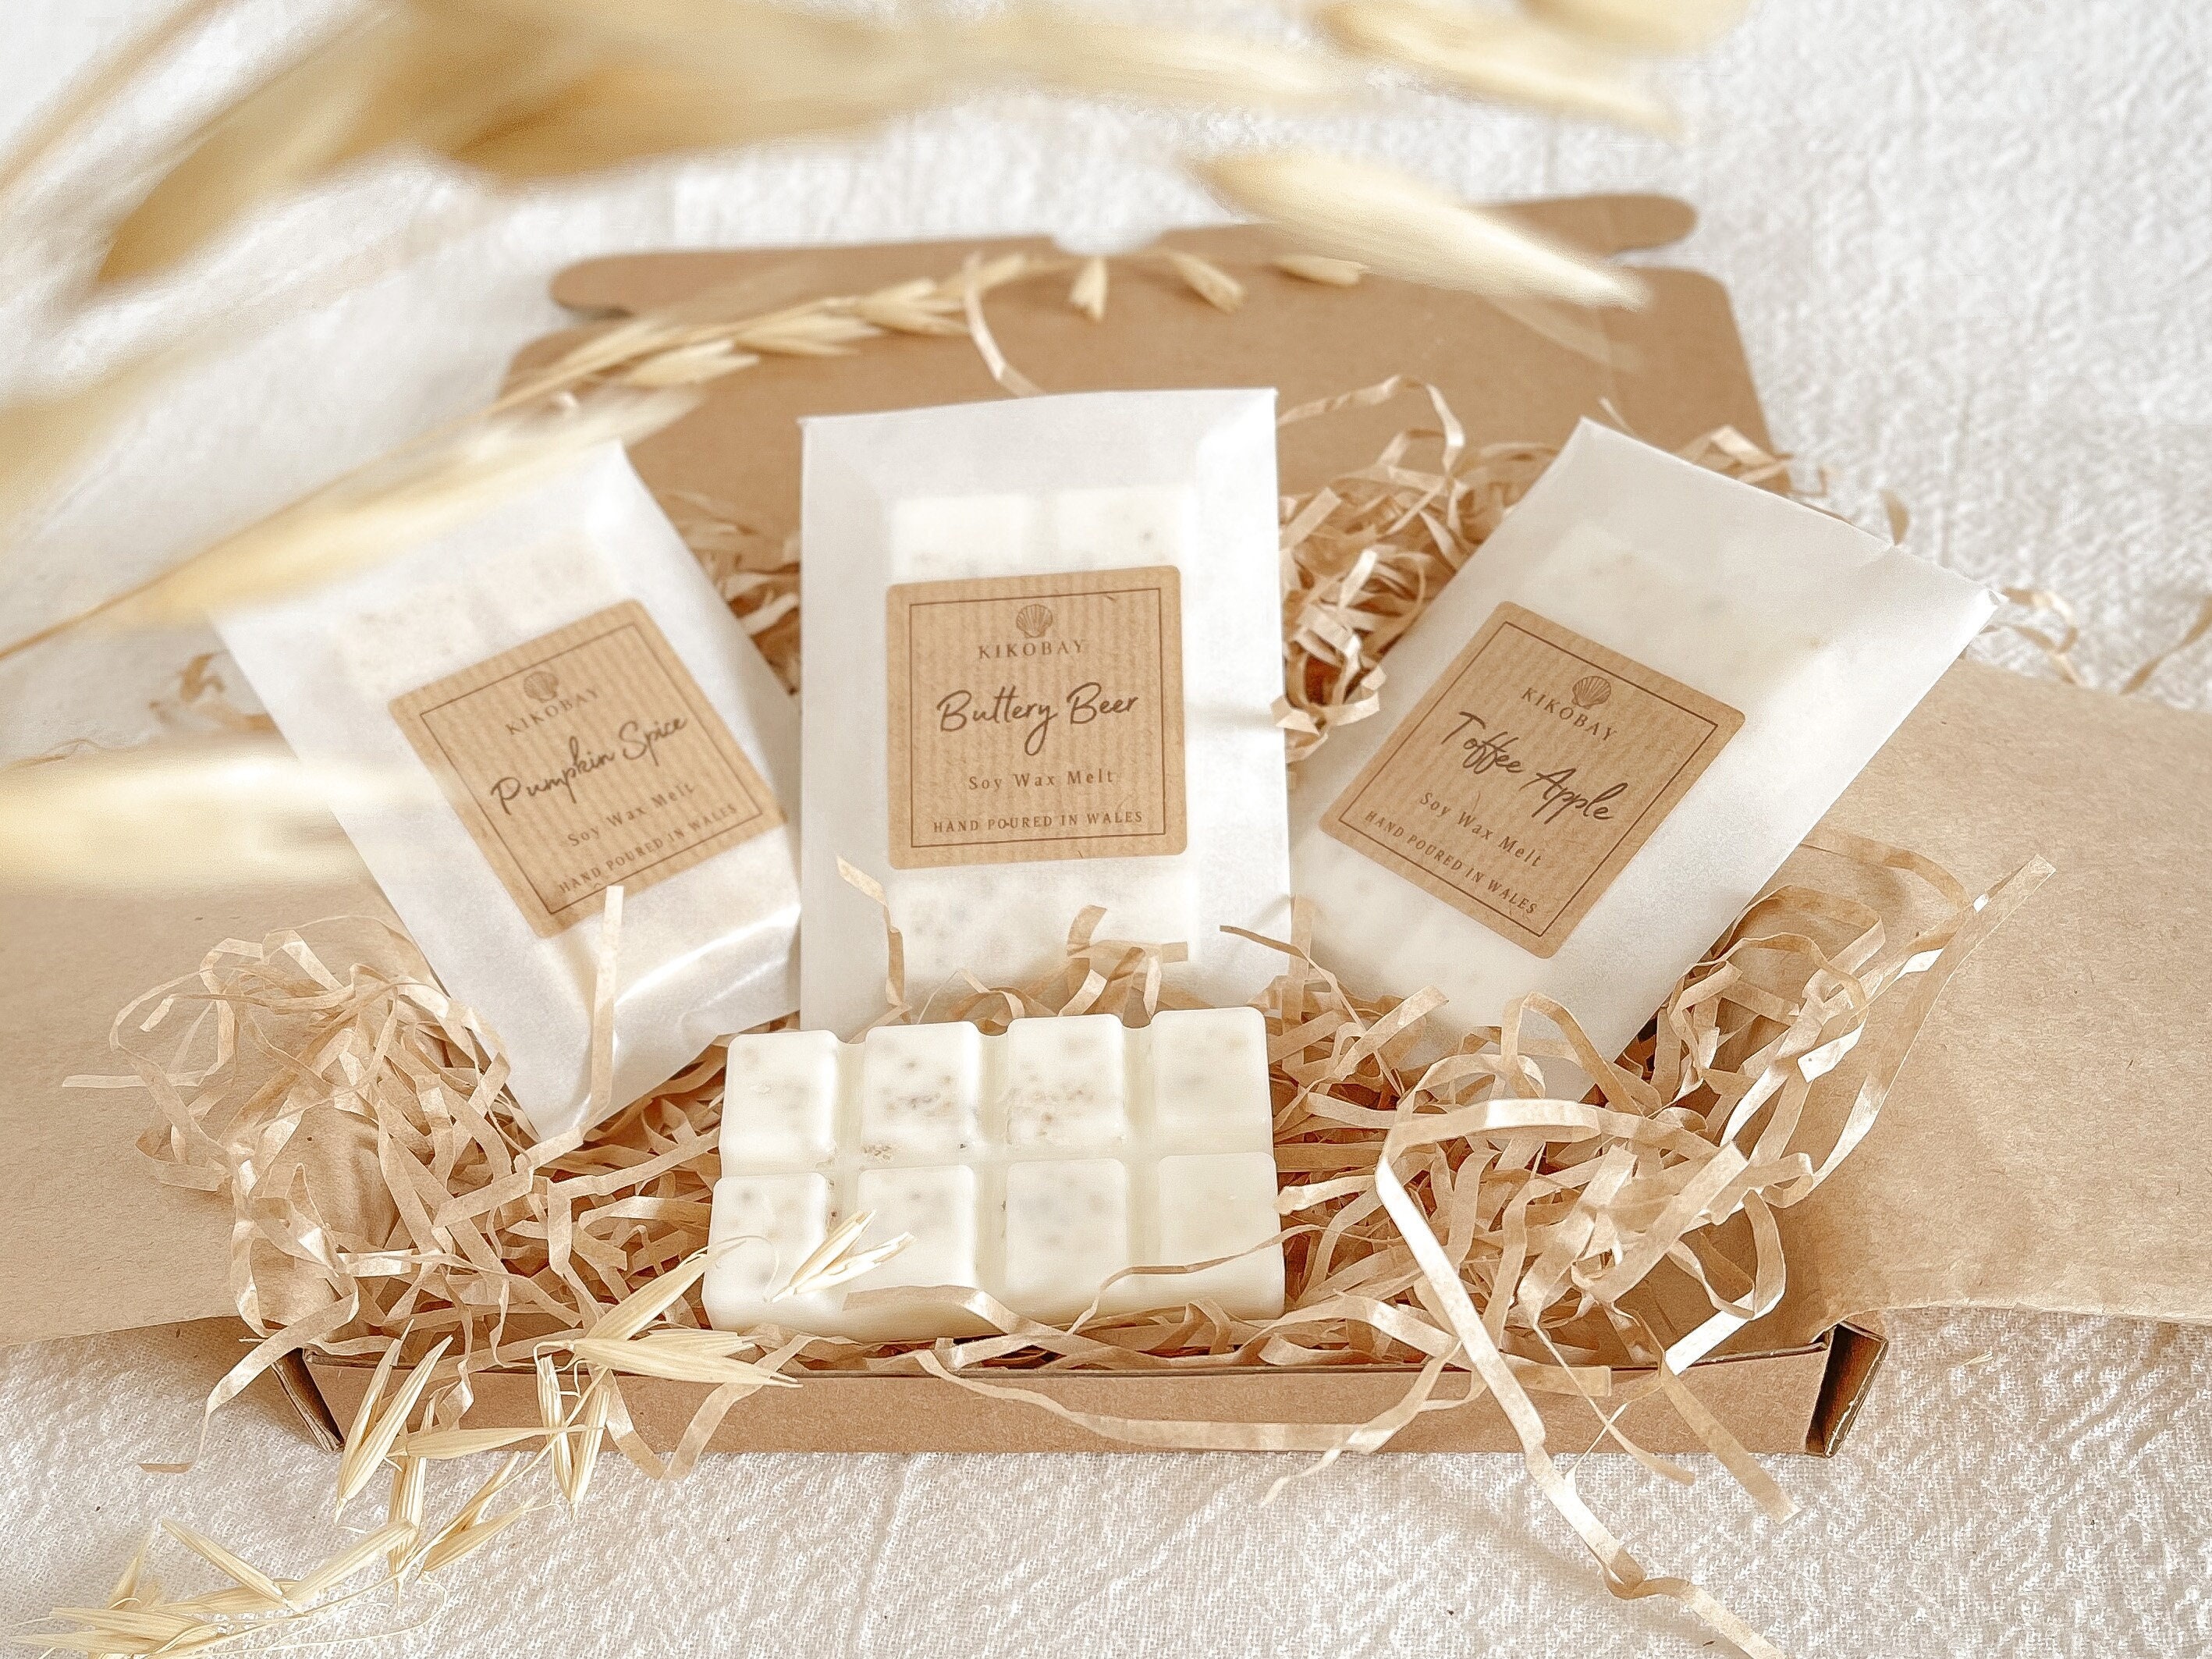 Essential Soy Wax Melts Natural Soy Wax Melts 100% Soy Wax Melts